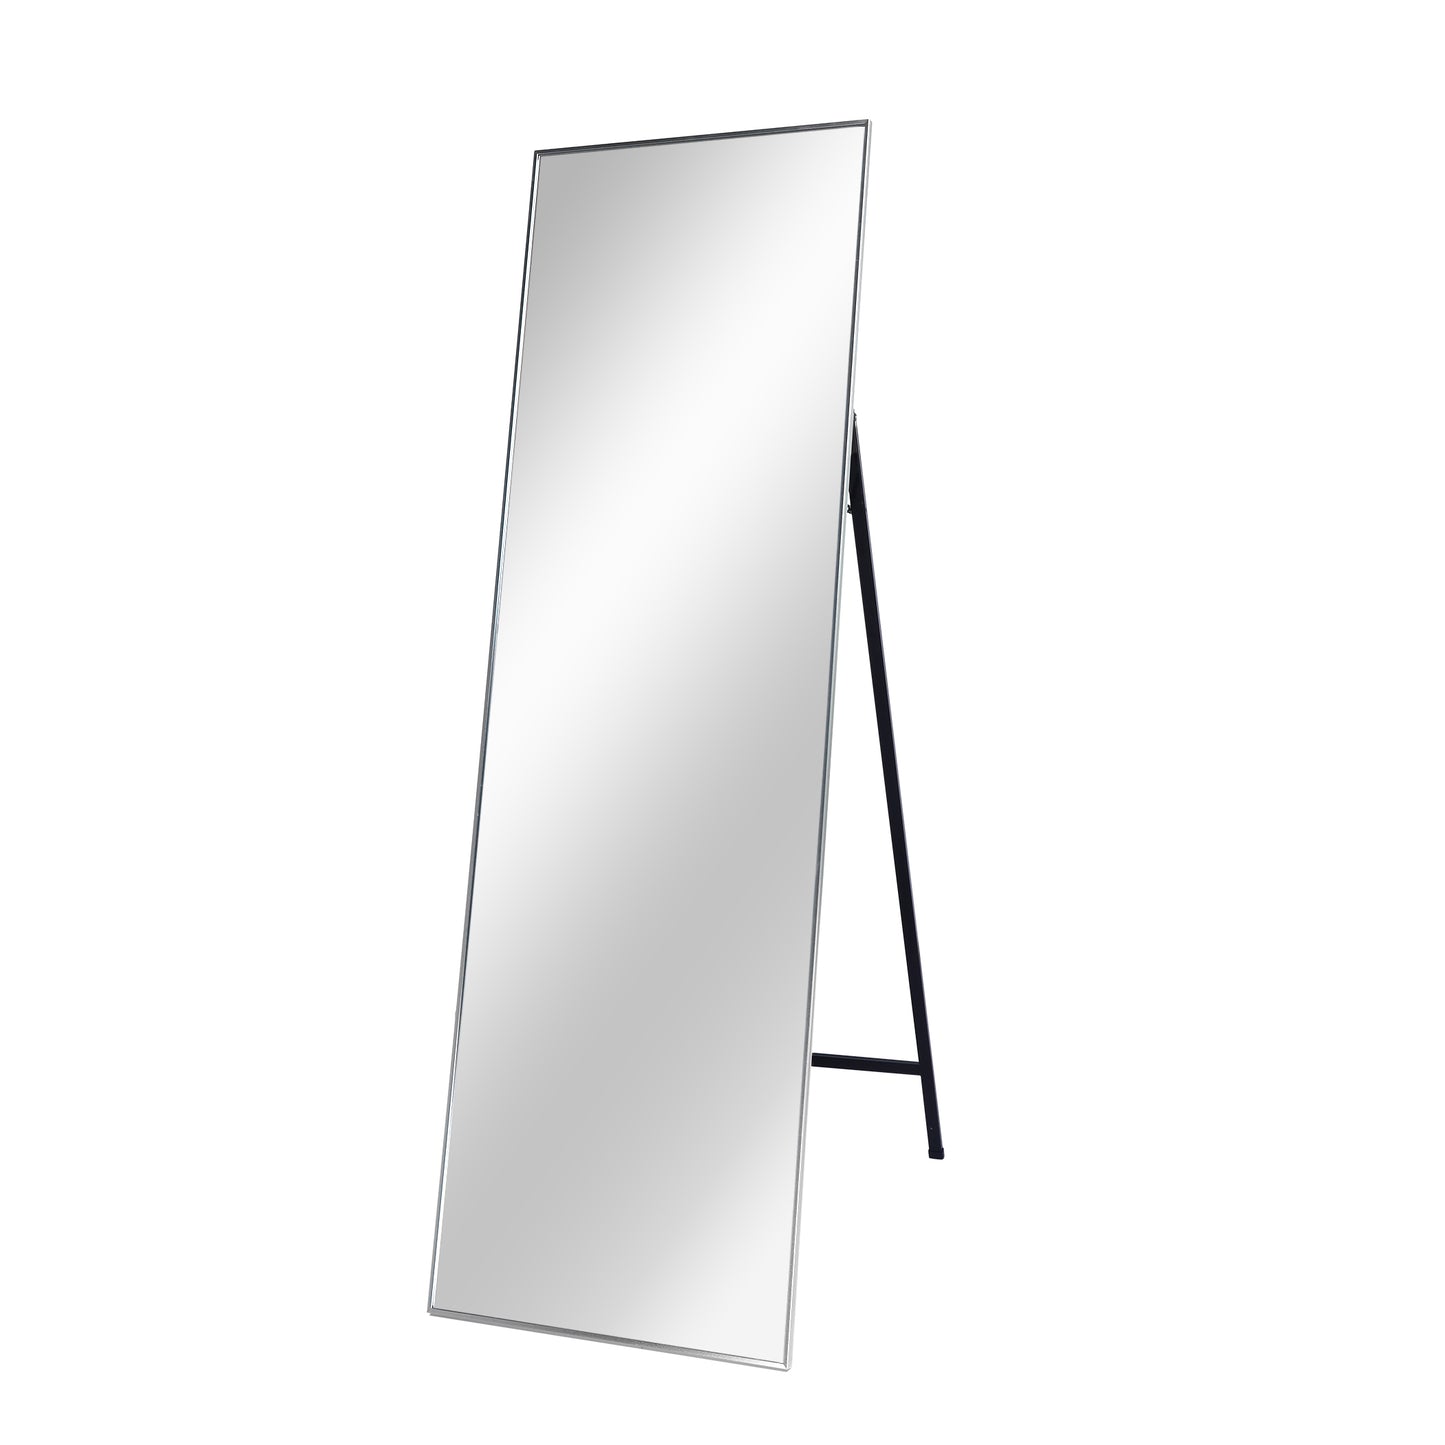 Full Length Mirror Standing Silver 65’’x22’’ for Bedroom with Aluminum Frame, Large Full Body Floor Mirror Wall Hanging or Leaning Modern Decor for Dressing, Living Room, Entryway or Dorm